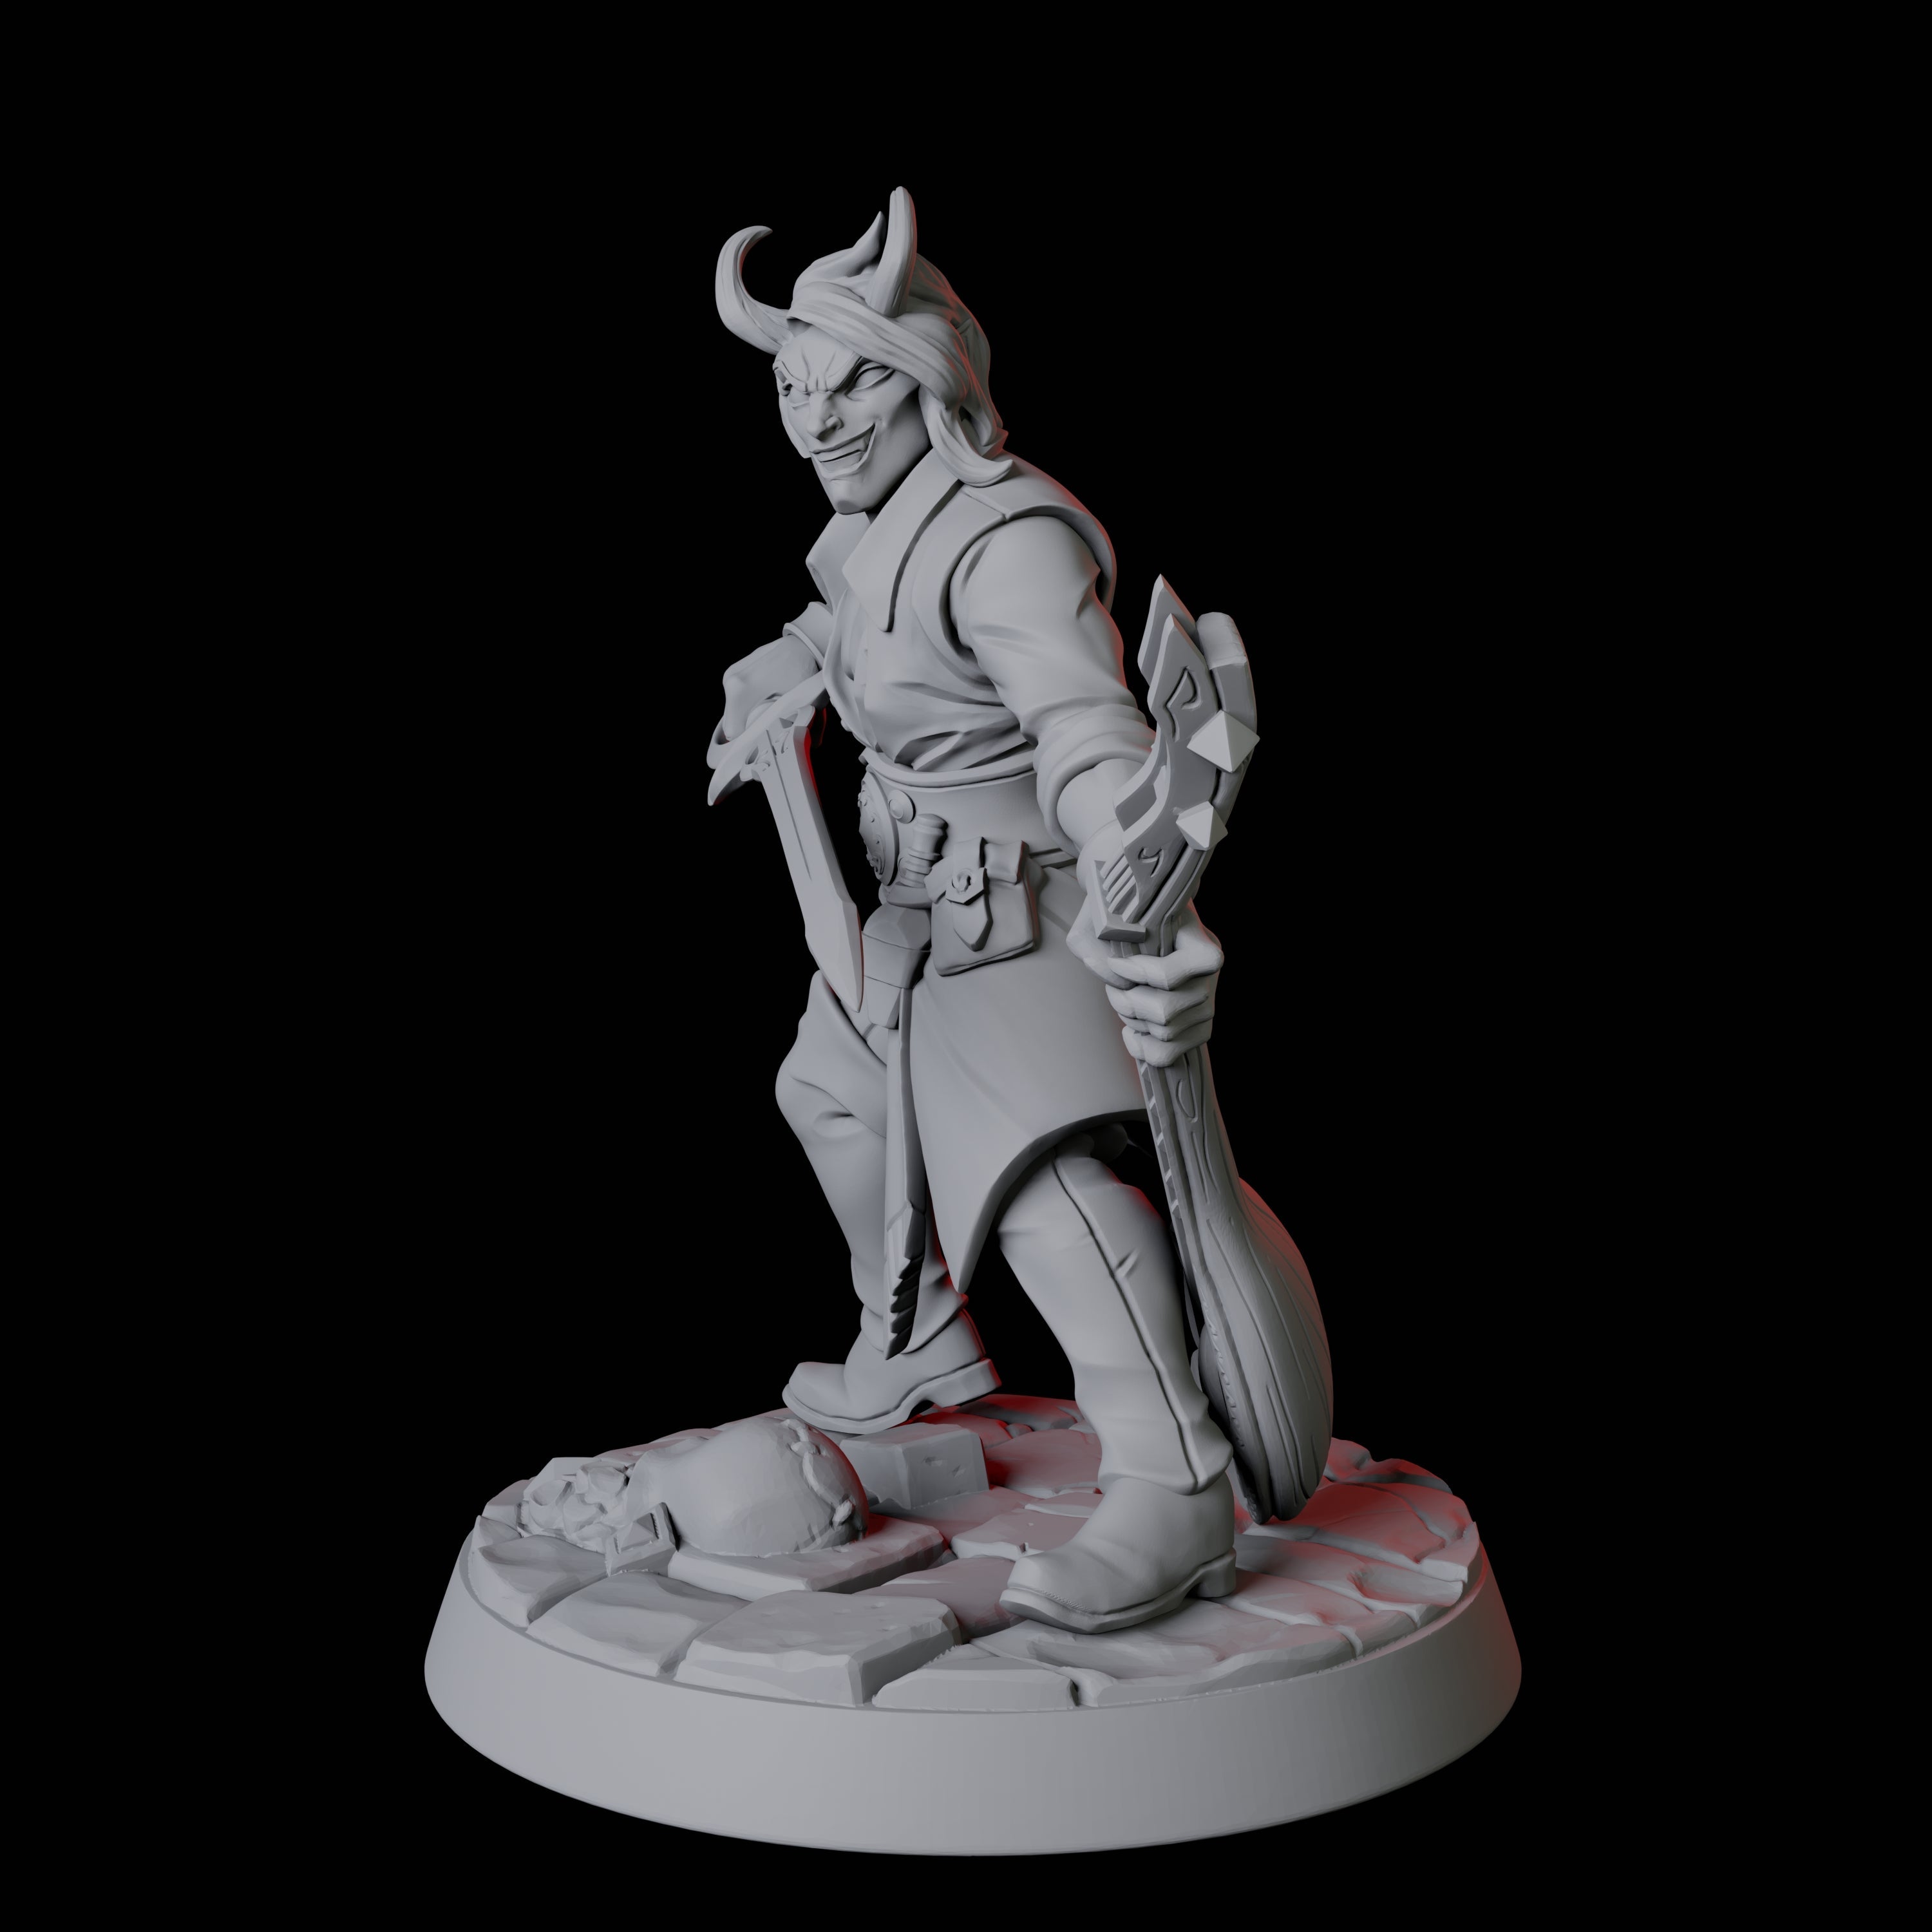 Tiefling Bard B Miniature for Dungeons and Dragons, Pathfinder or other TTRPGs